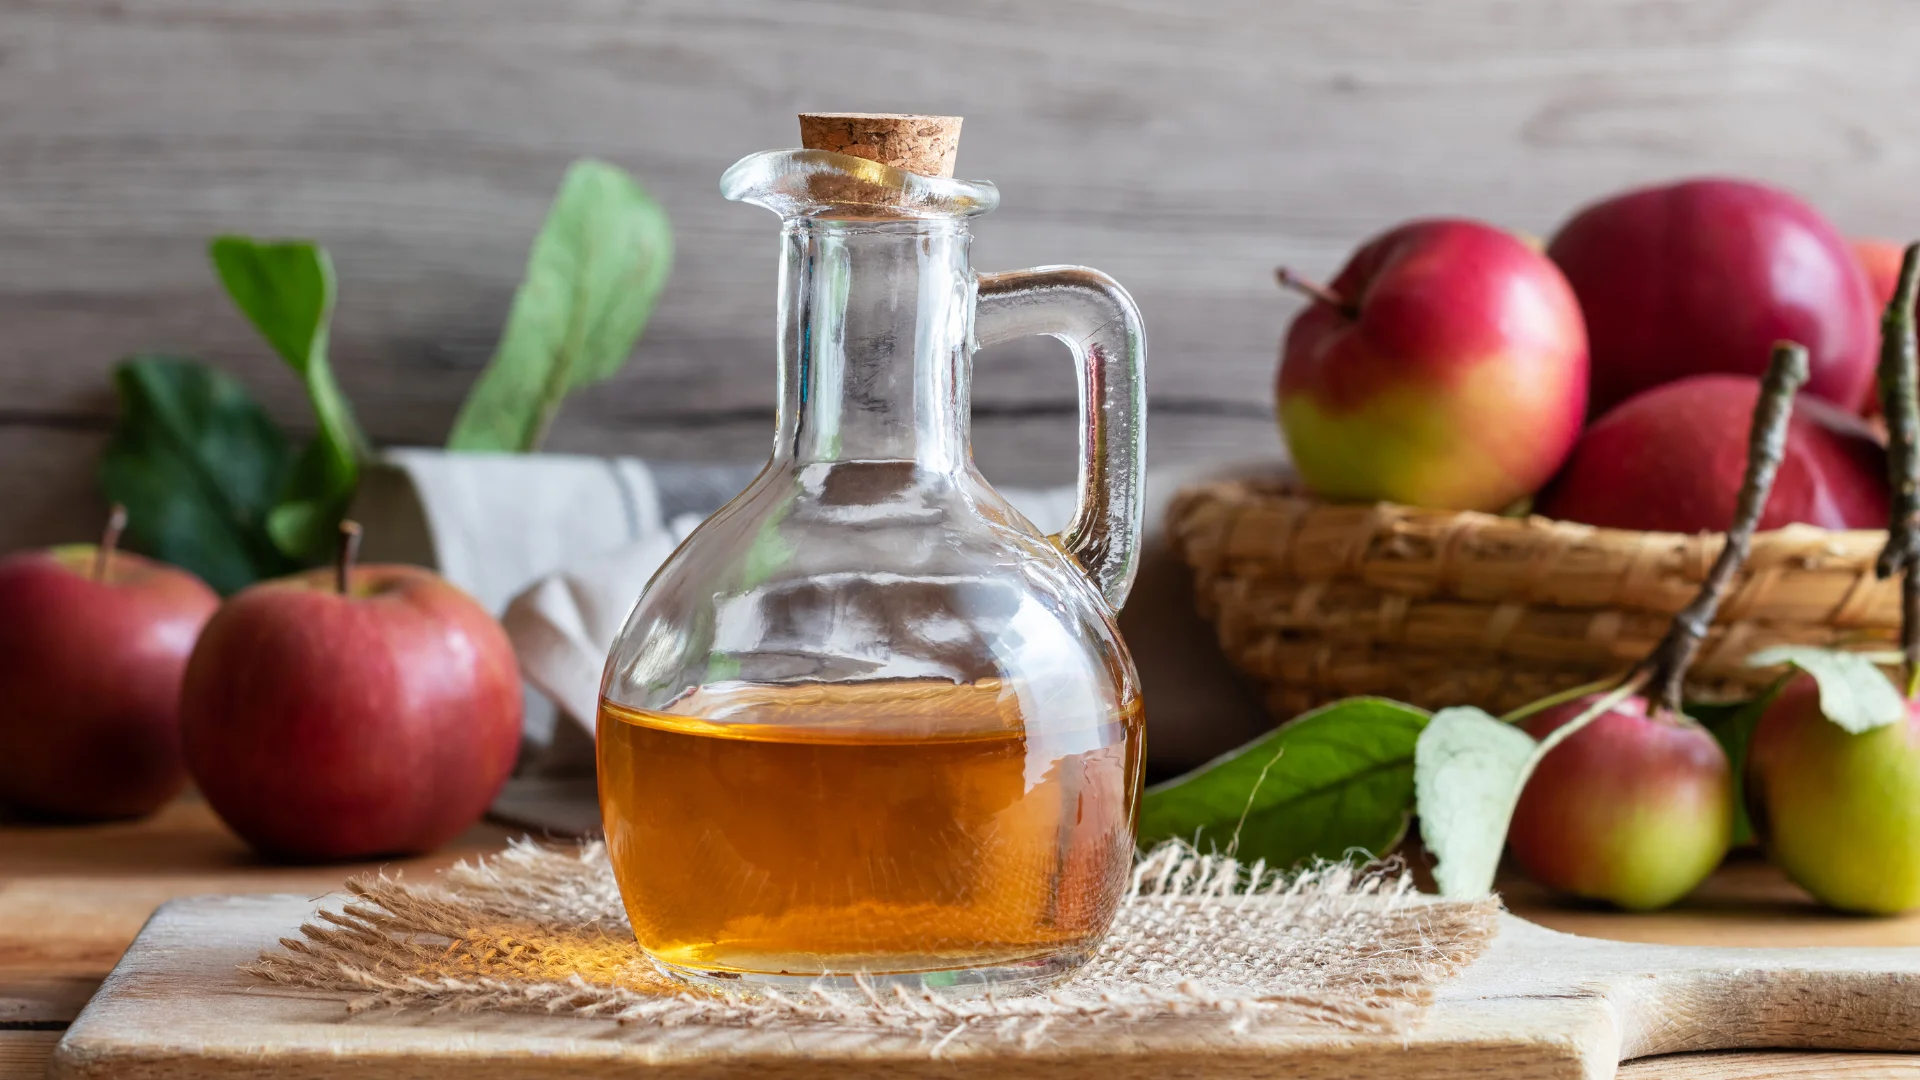 Apple Vinegar Before Meals Seen to Lower Blood Glucose